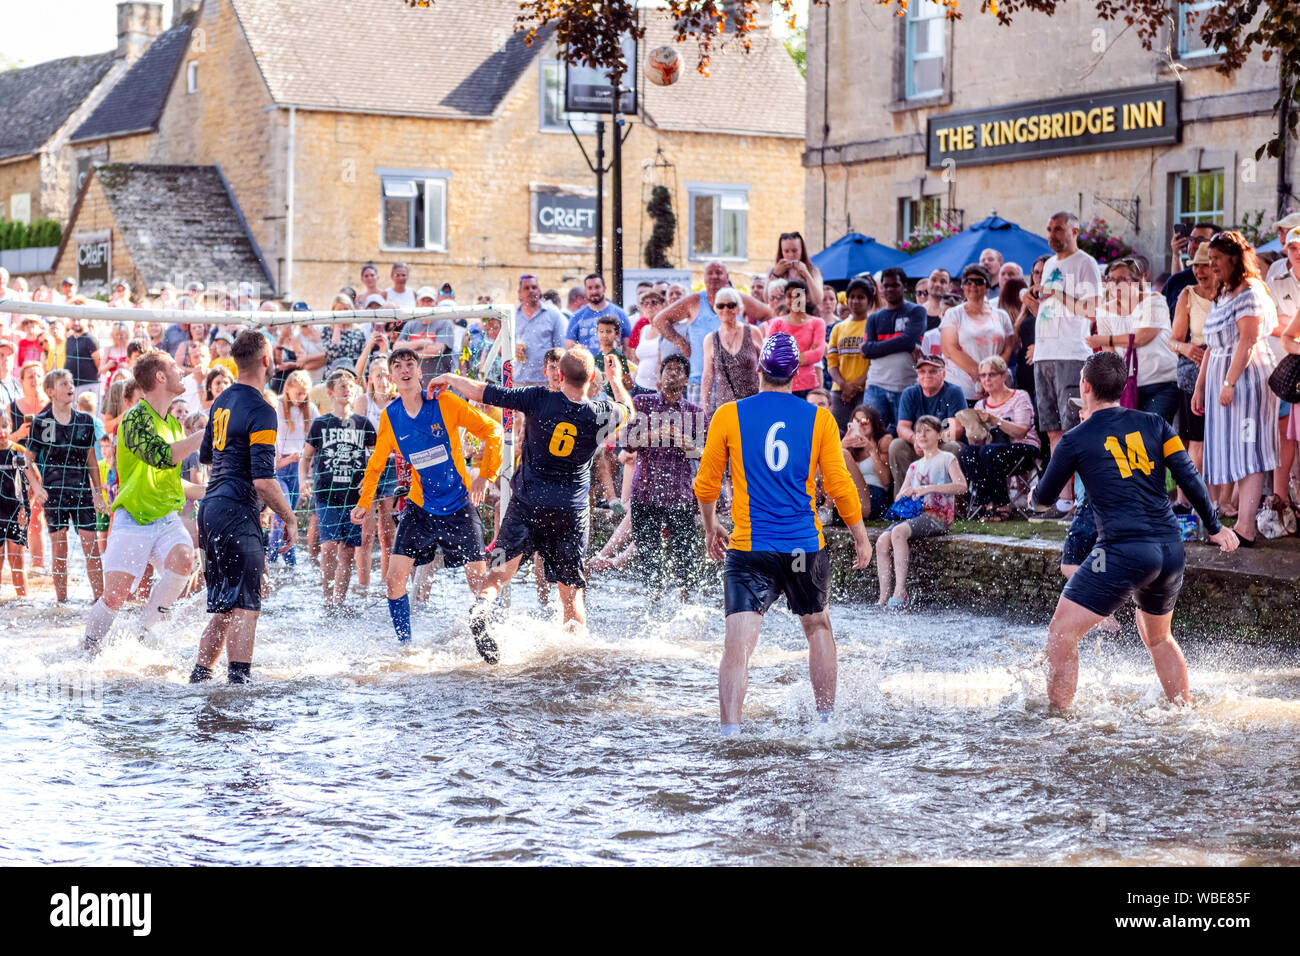 Charity football match played in the River Windrush at Bourton-on-the-Water, Cotswolds, UK. Football game in river on August Bank Holiday Monday. Stock Photo